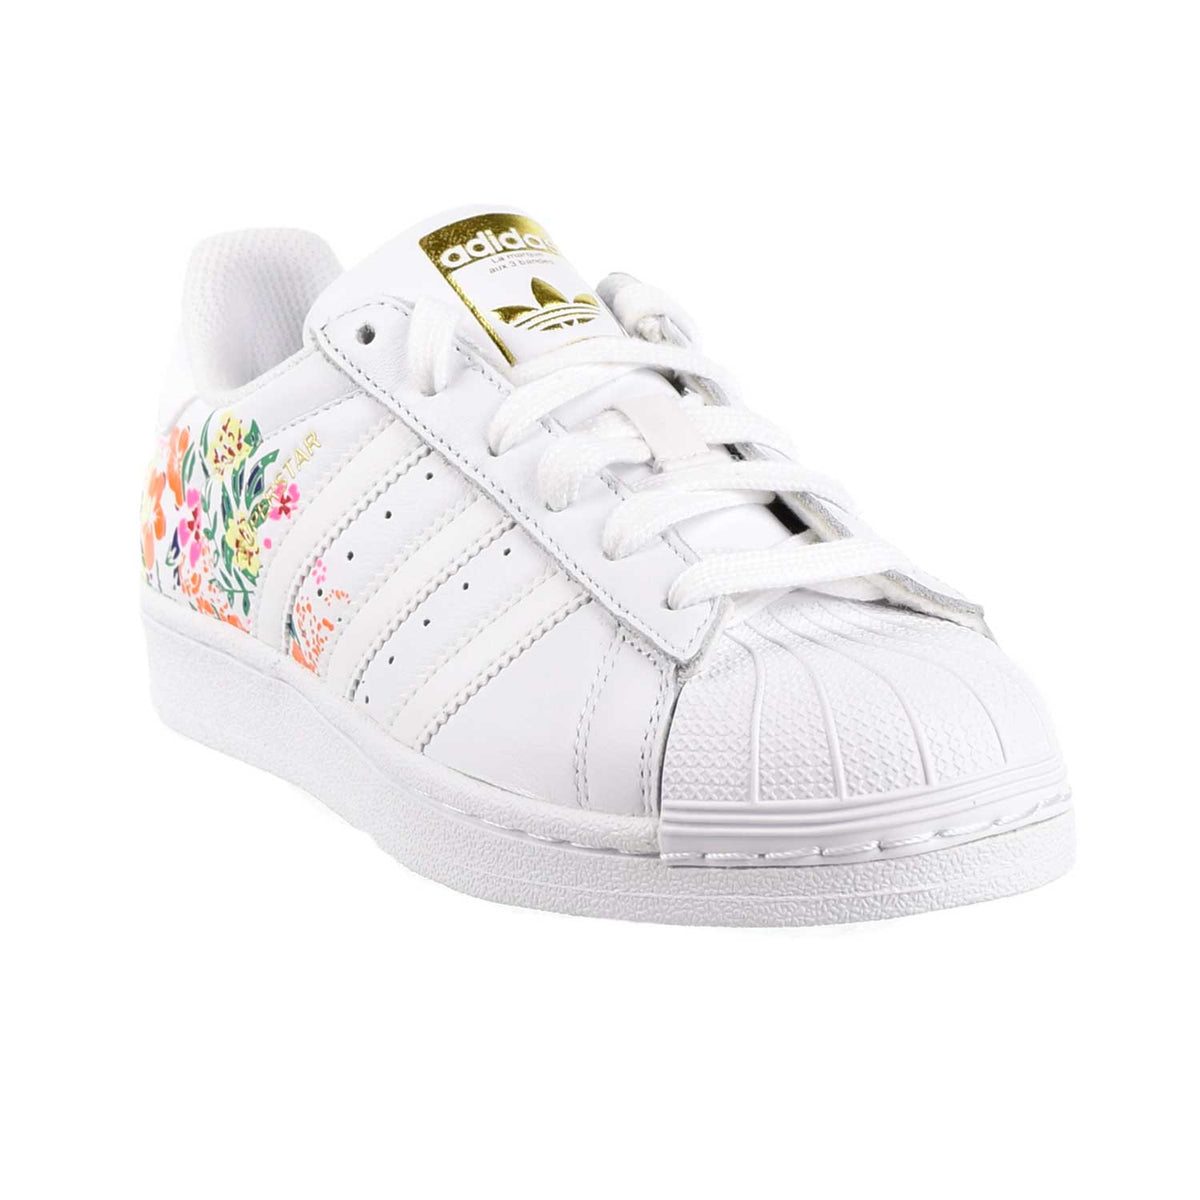 Adidas Superstar Shoes Floral Footwear White/Gold Metallic – Sports Plaza NY